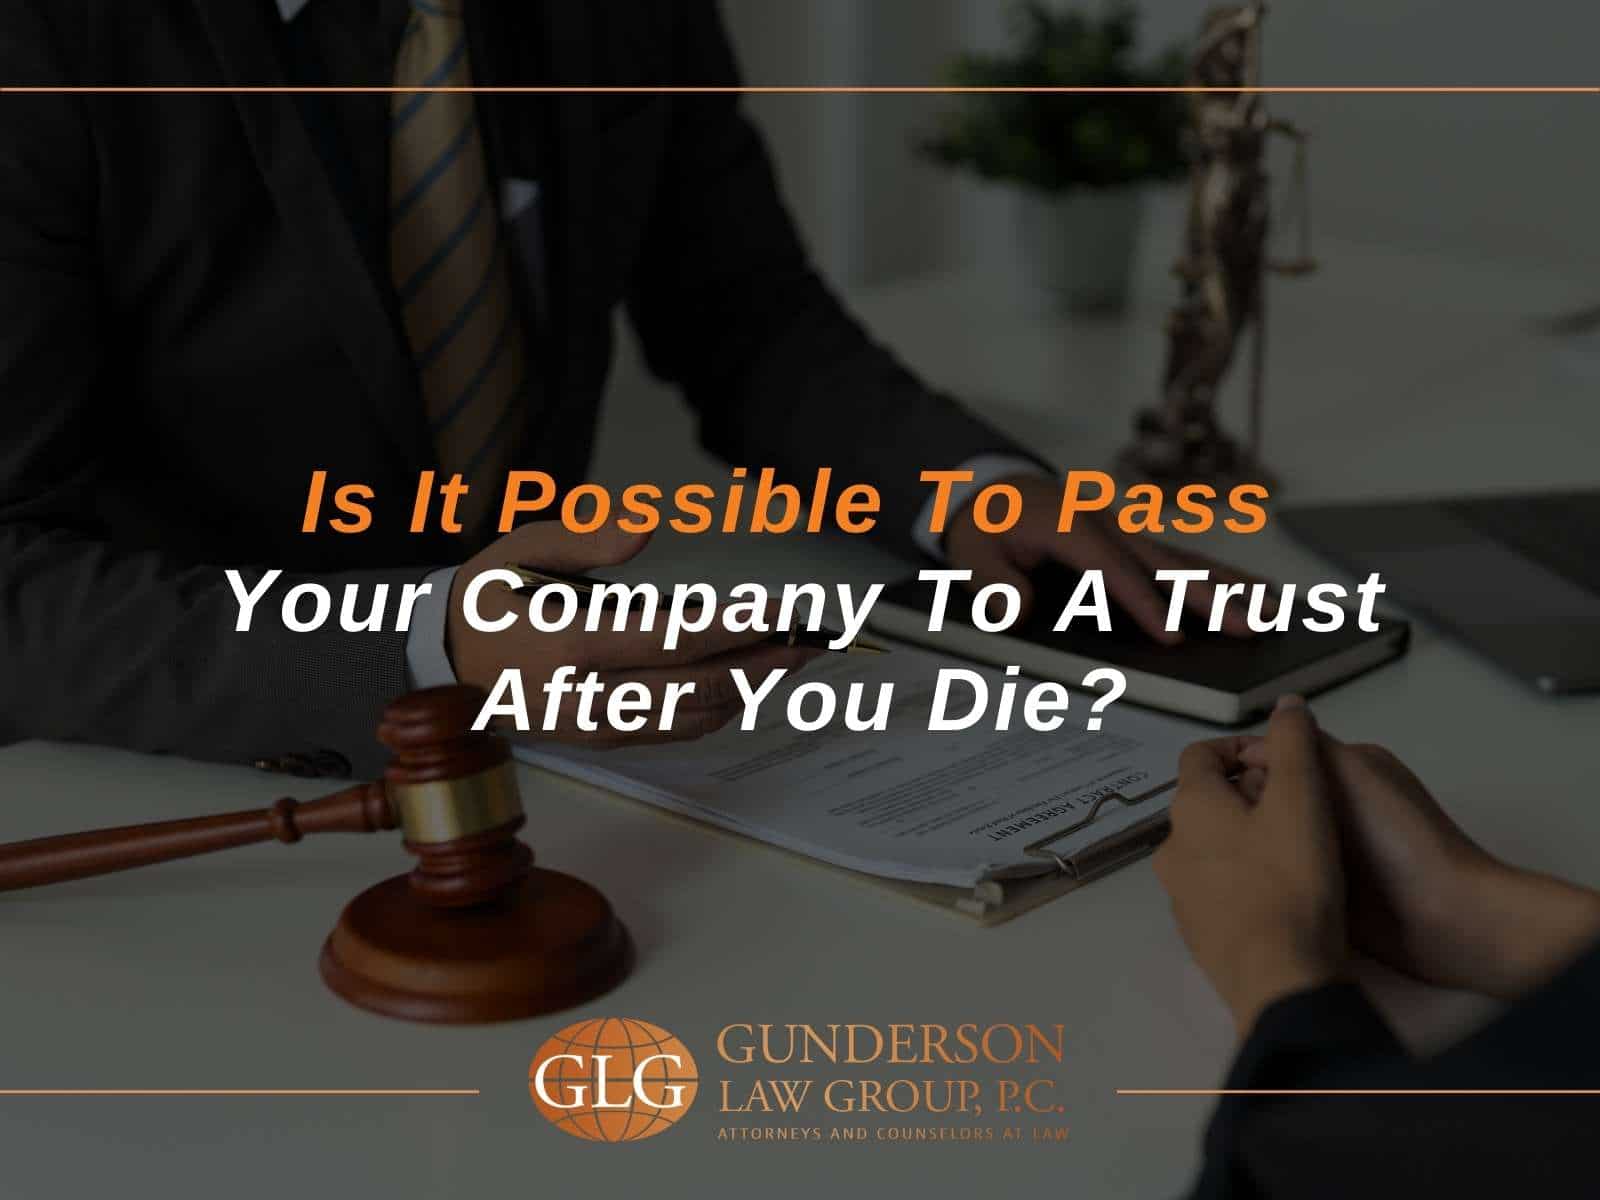 A trust owning a business in Arizona